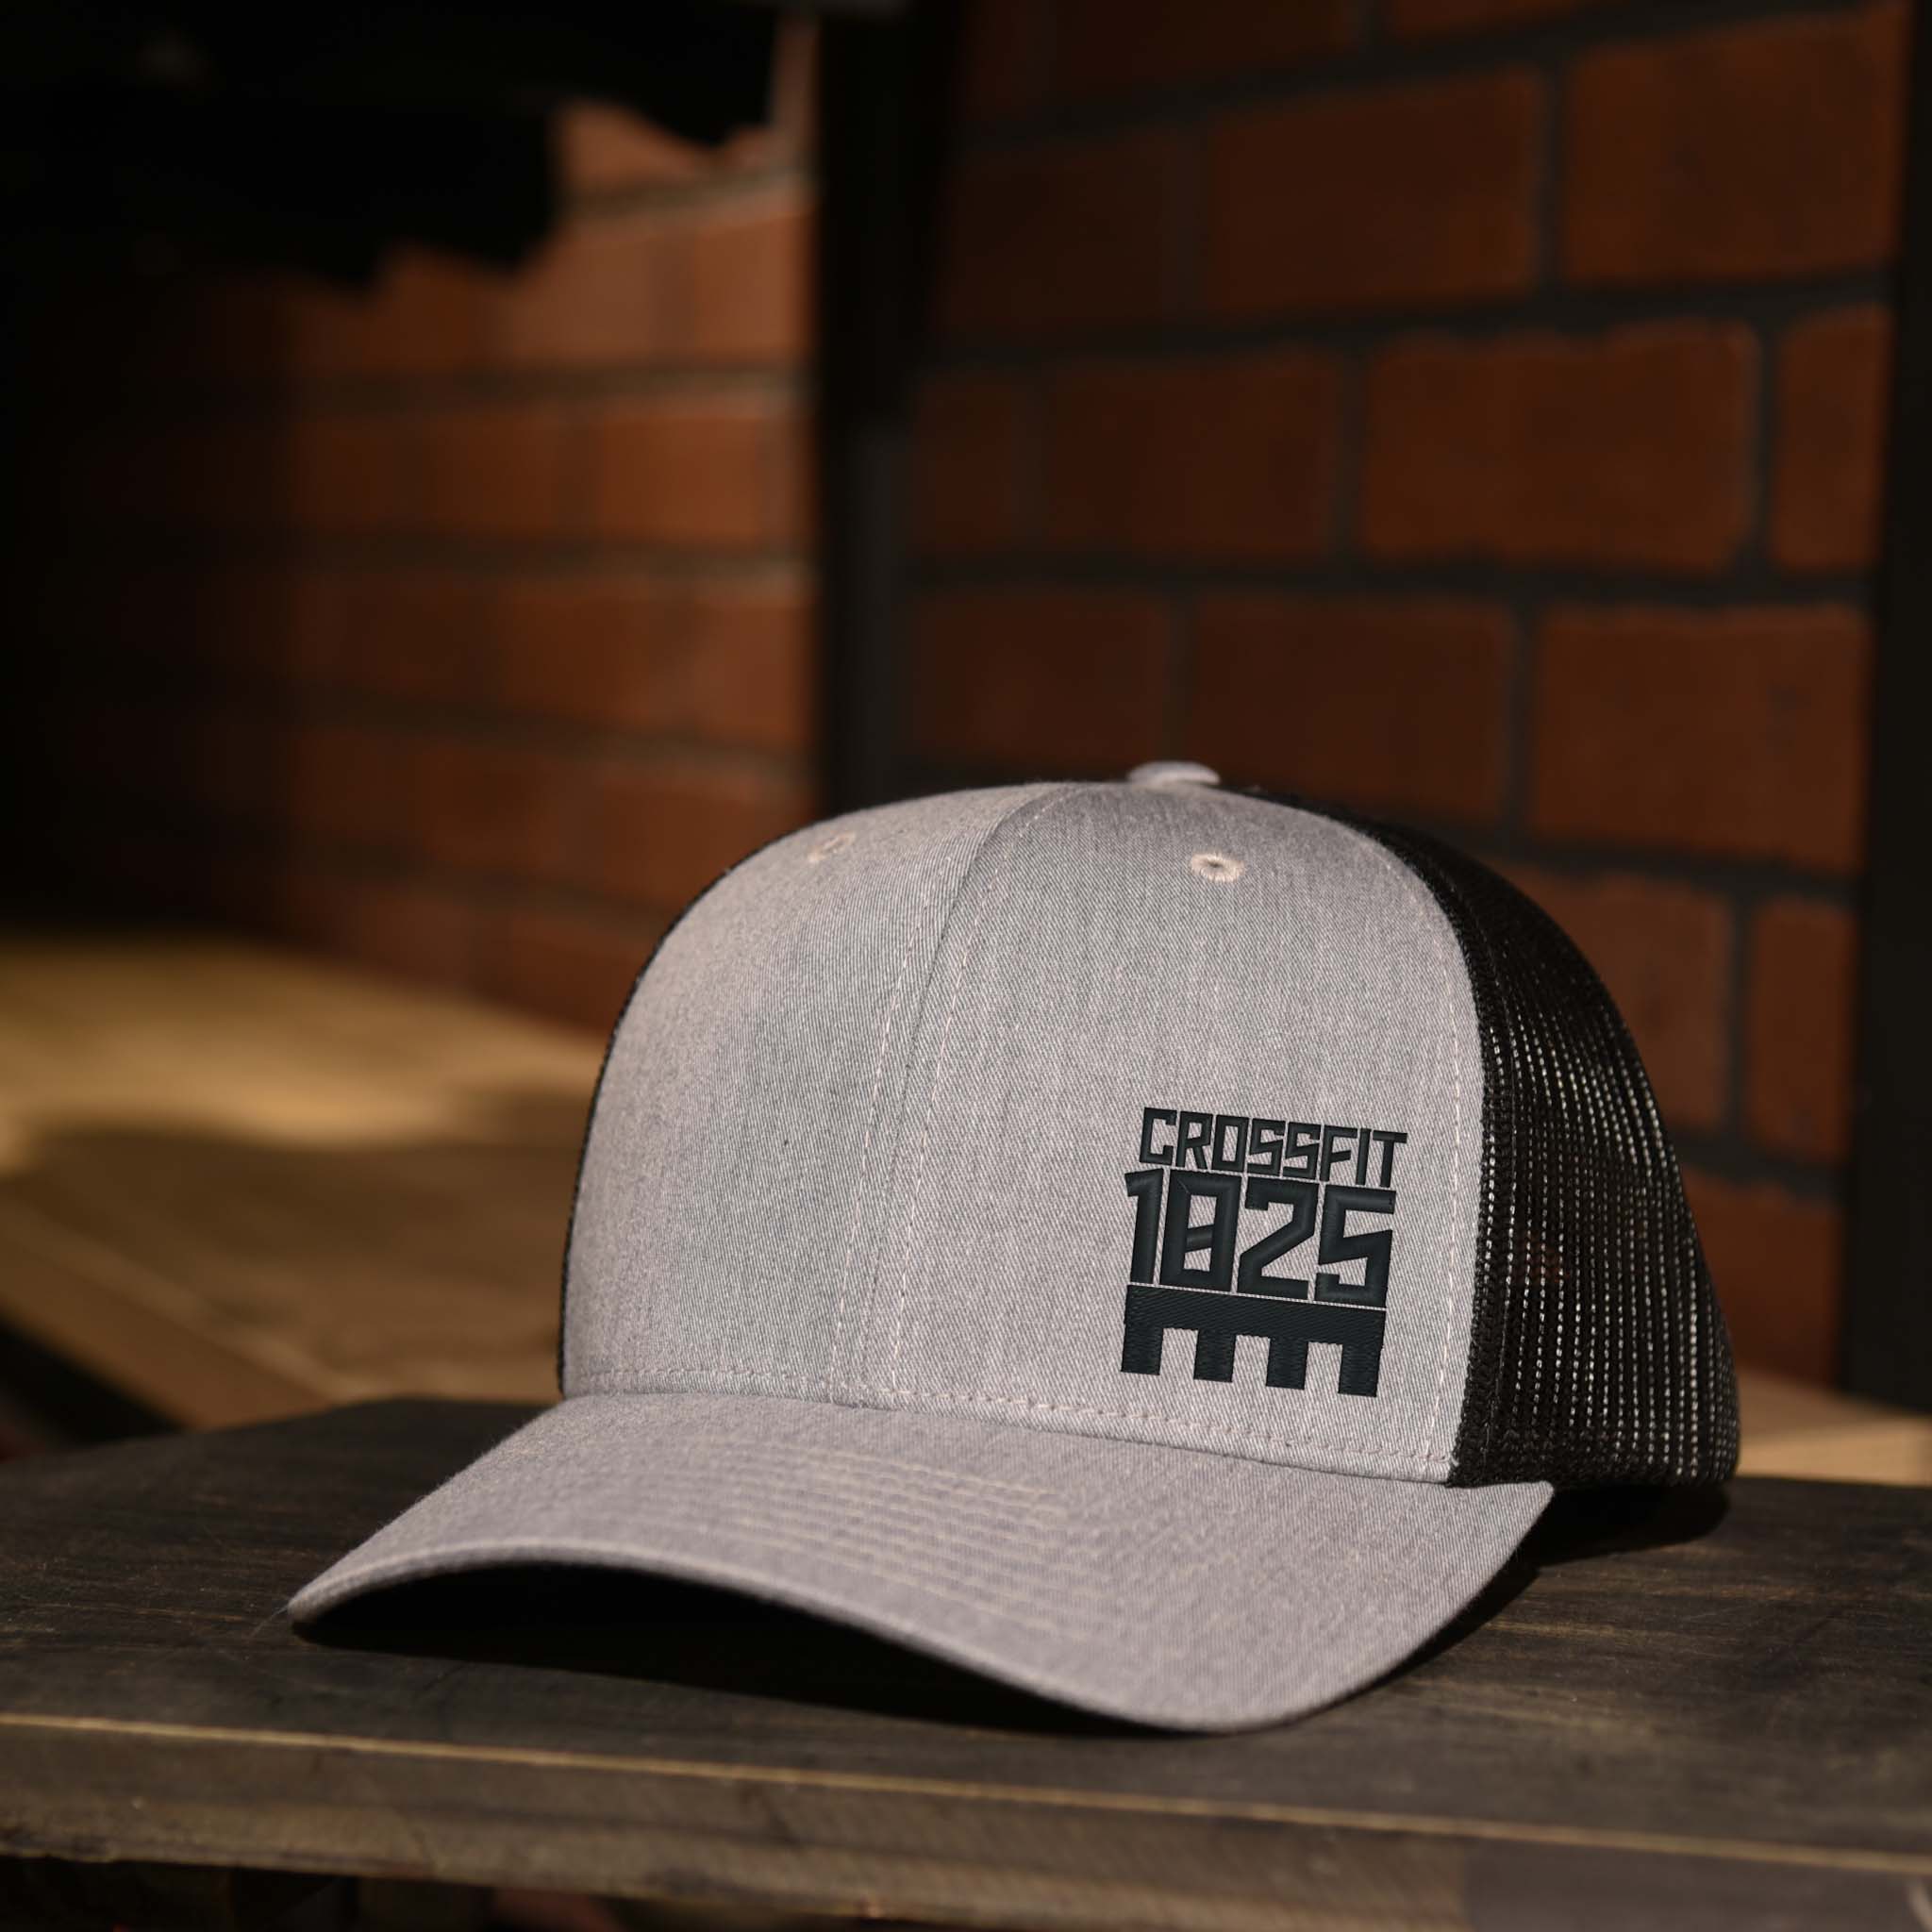 Heather Gray and Black Trucker Hat with Crossfit 1825 Logo embroidered in black